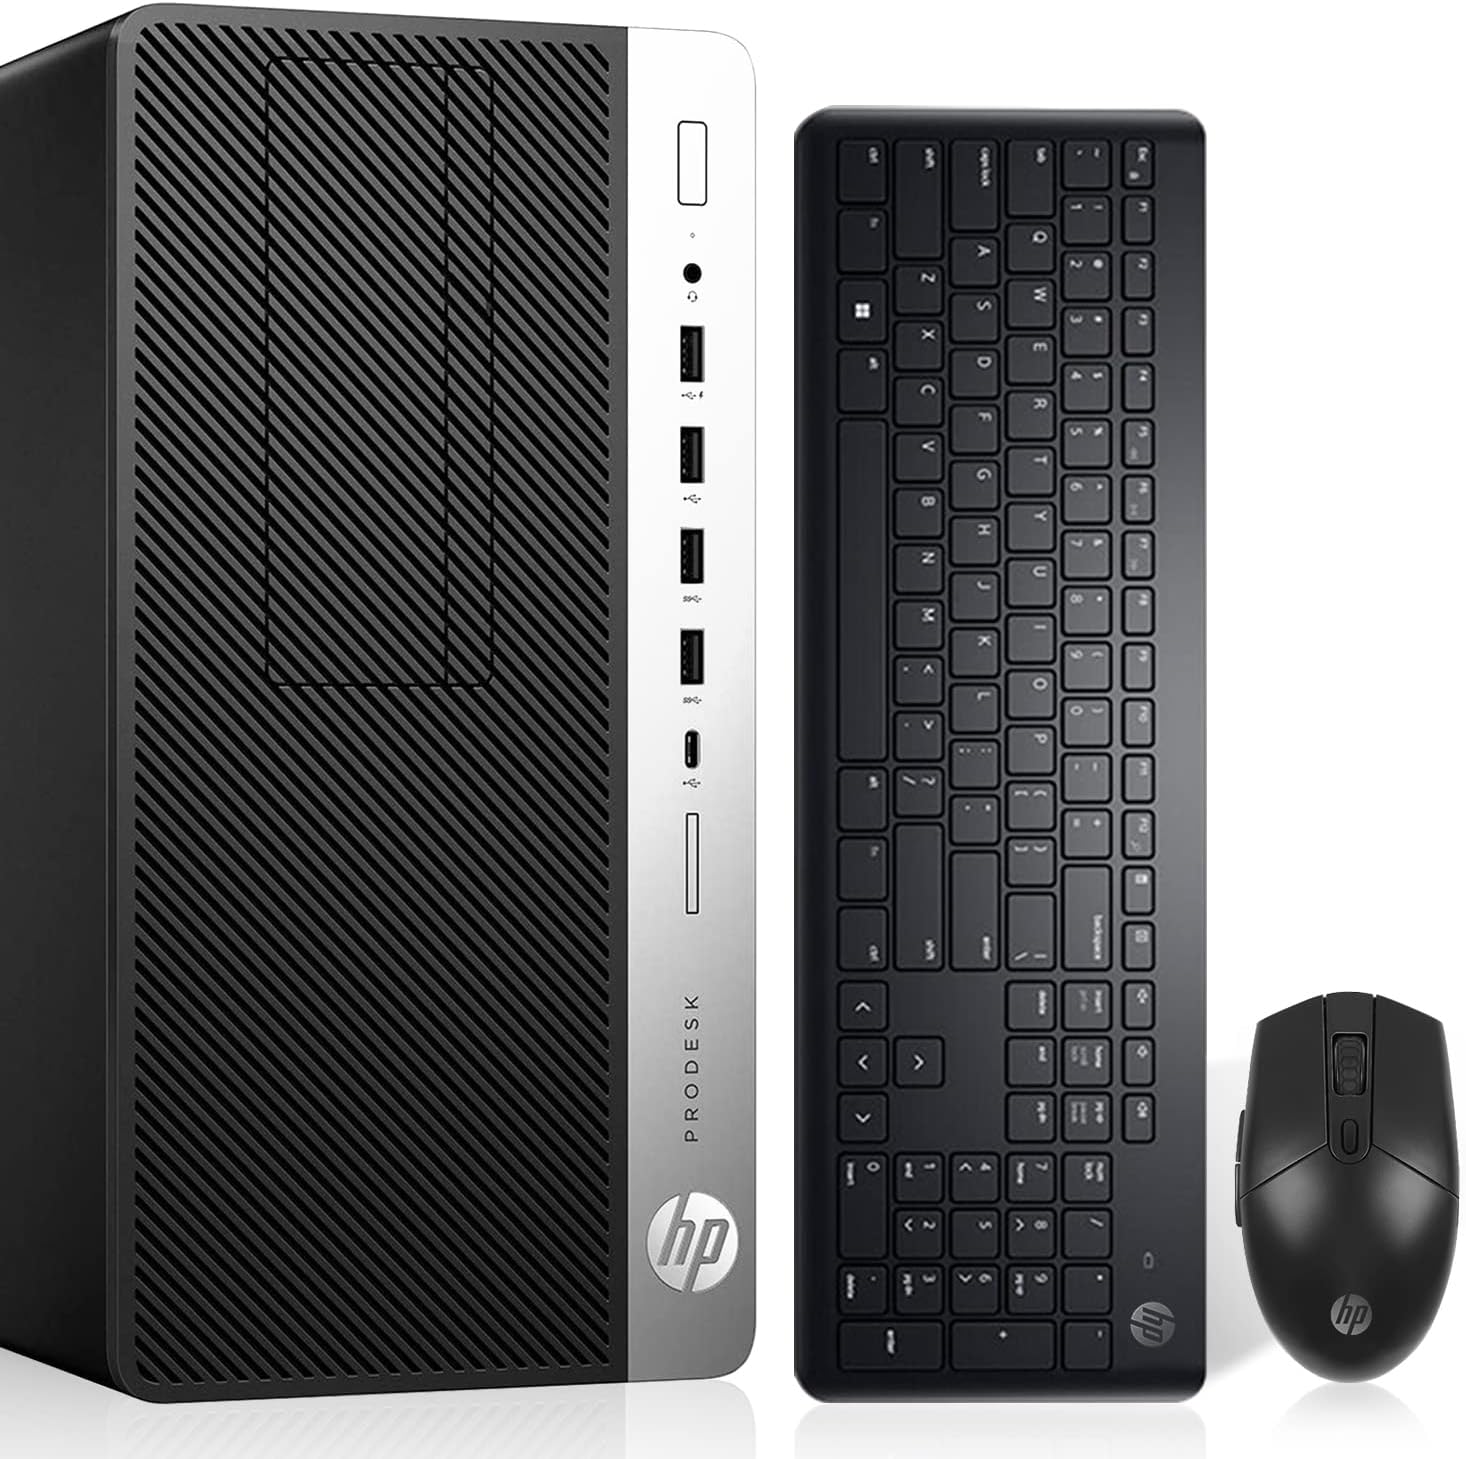 HP ProDesk 600 G3 Mini Tower Desk top PC i7-6700 Up to 4.00GHz 32GB RAM 1TB SSD + 1TB HDD HDMI Built in Wi-Fi  BT DVD-RW Dual Monitor Support Wireless Keyboard  Mouse Windows 10 Pro (Renewed)